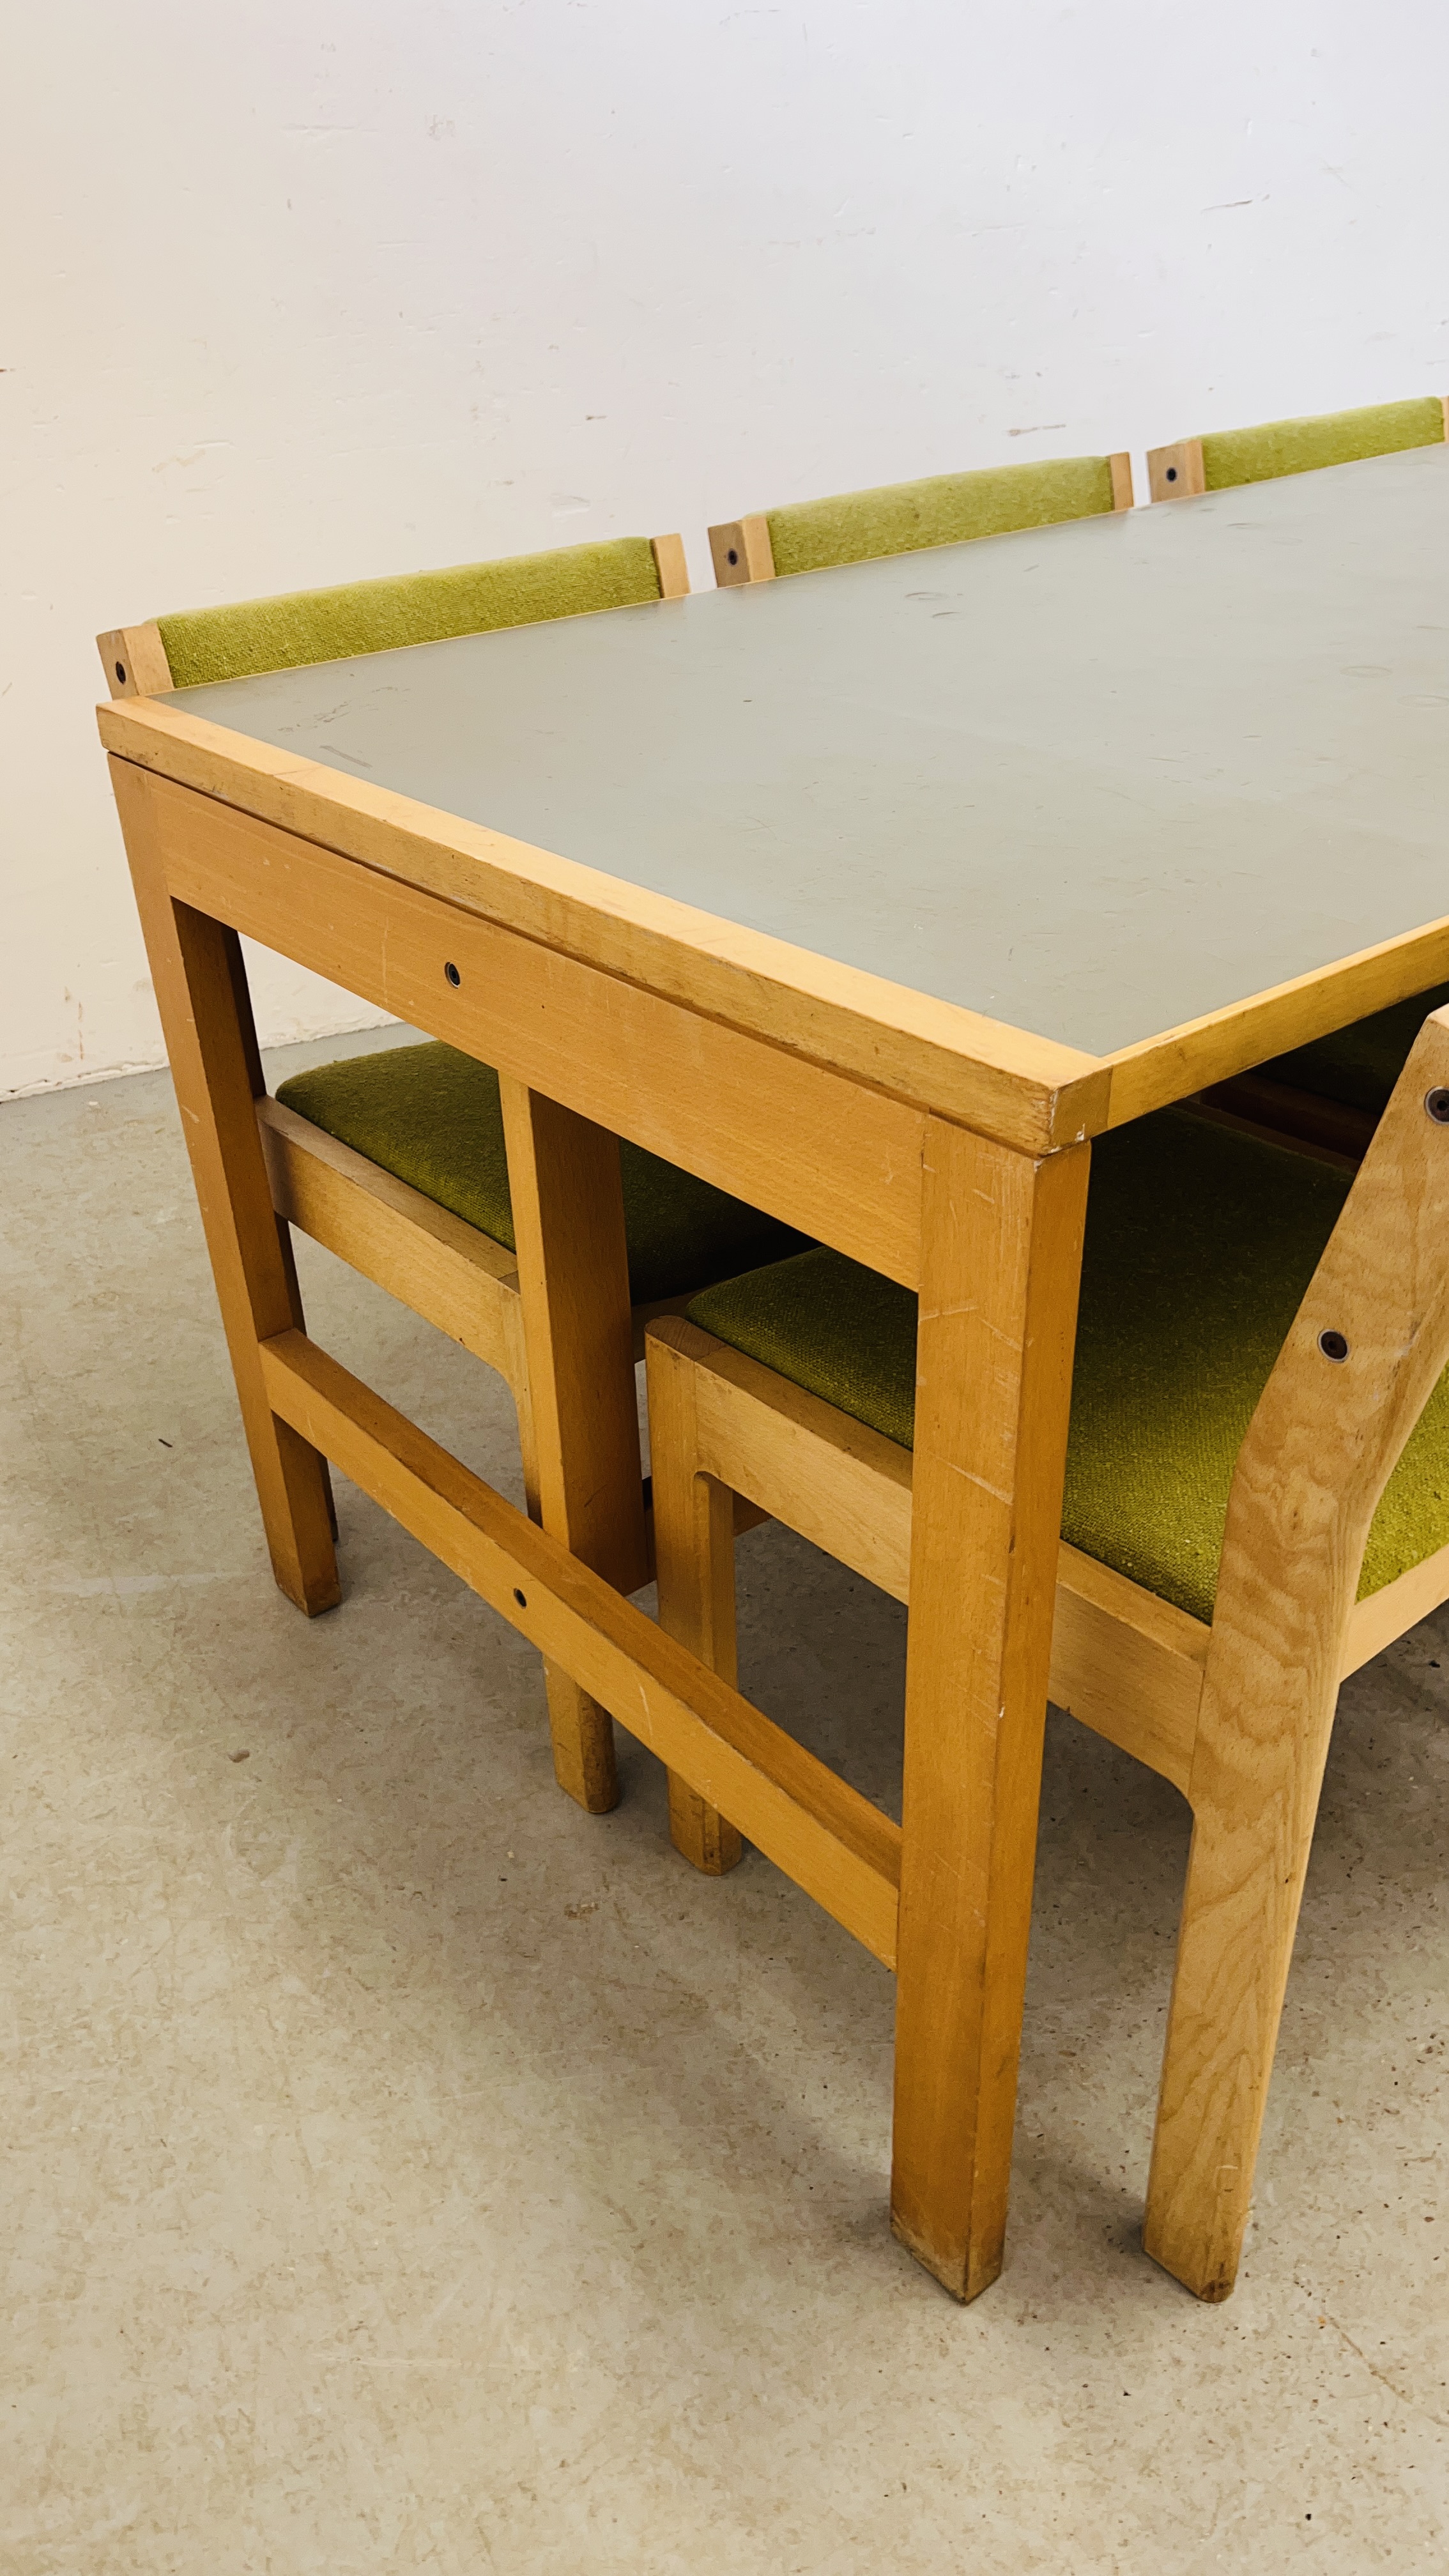 A MODERN BEECH WOOD DESK L 173CM X D 82CM X H 73CM ALONG WITH A SET OF 6 BEECH FRAMED DINING CHAIRS. - Image 7 of 10